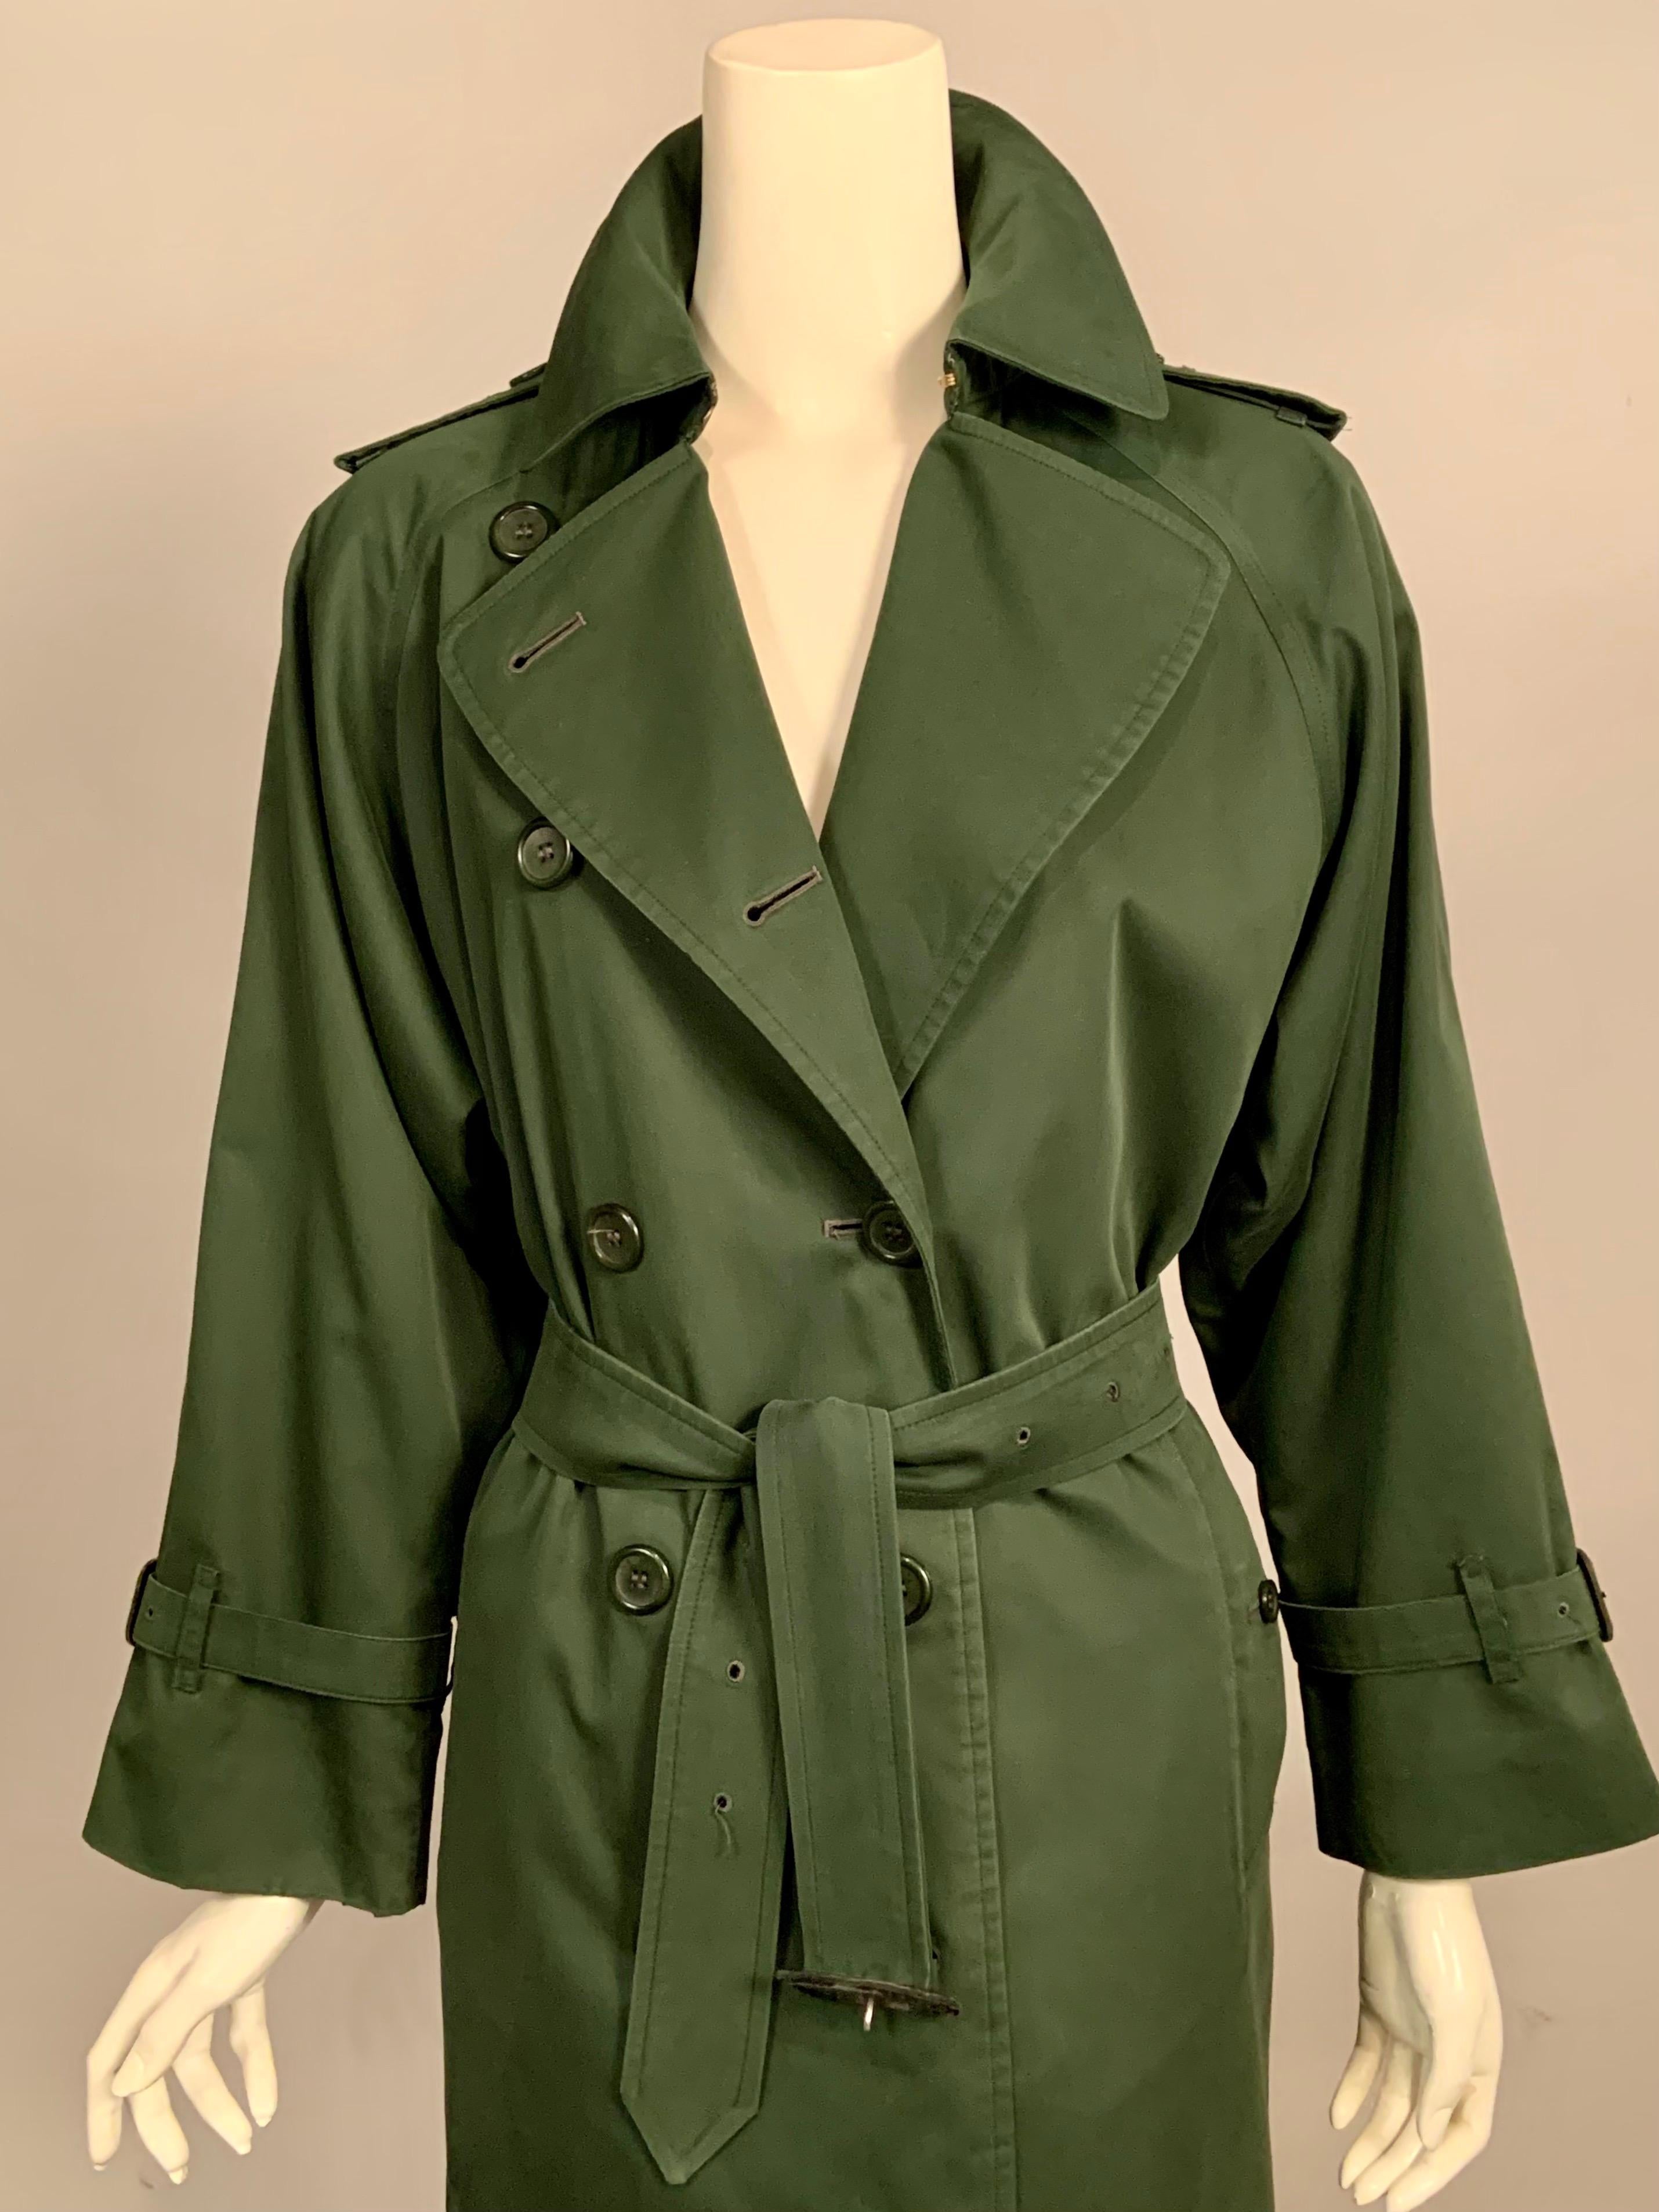 This classic Burberry dark green trench coat has shoulder epaulets, leather buckles on the sleeves, a belt with another  leather buckle, two pockets with button flaps, a green version of the iconic Burberry plaid lining and a removeable  zip in